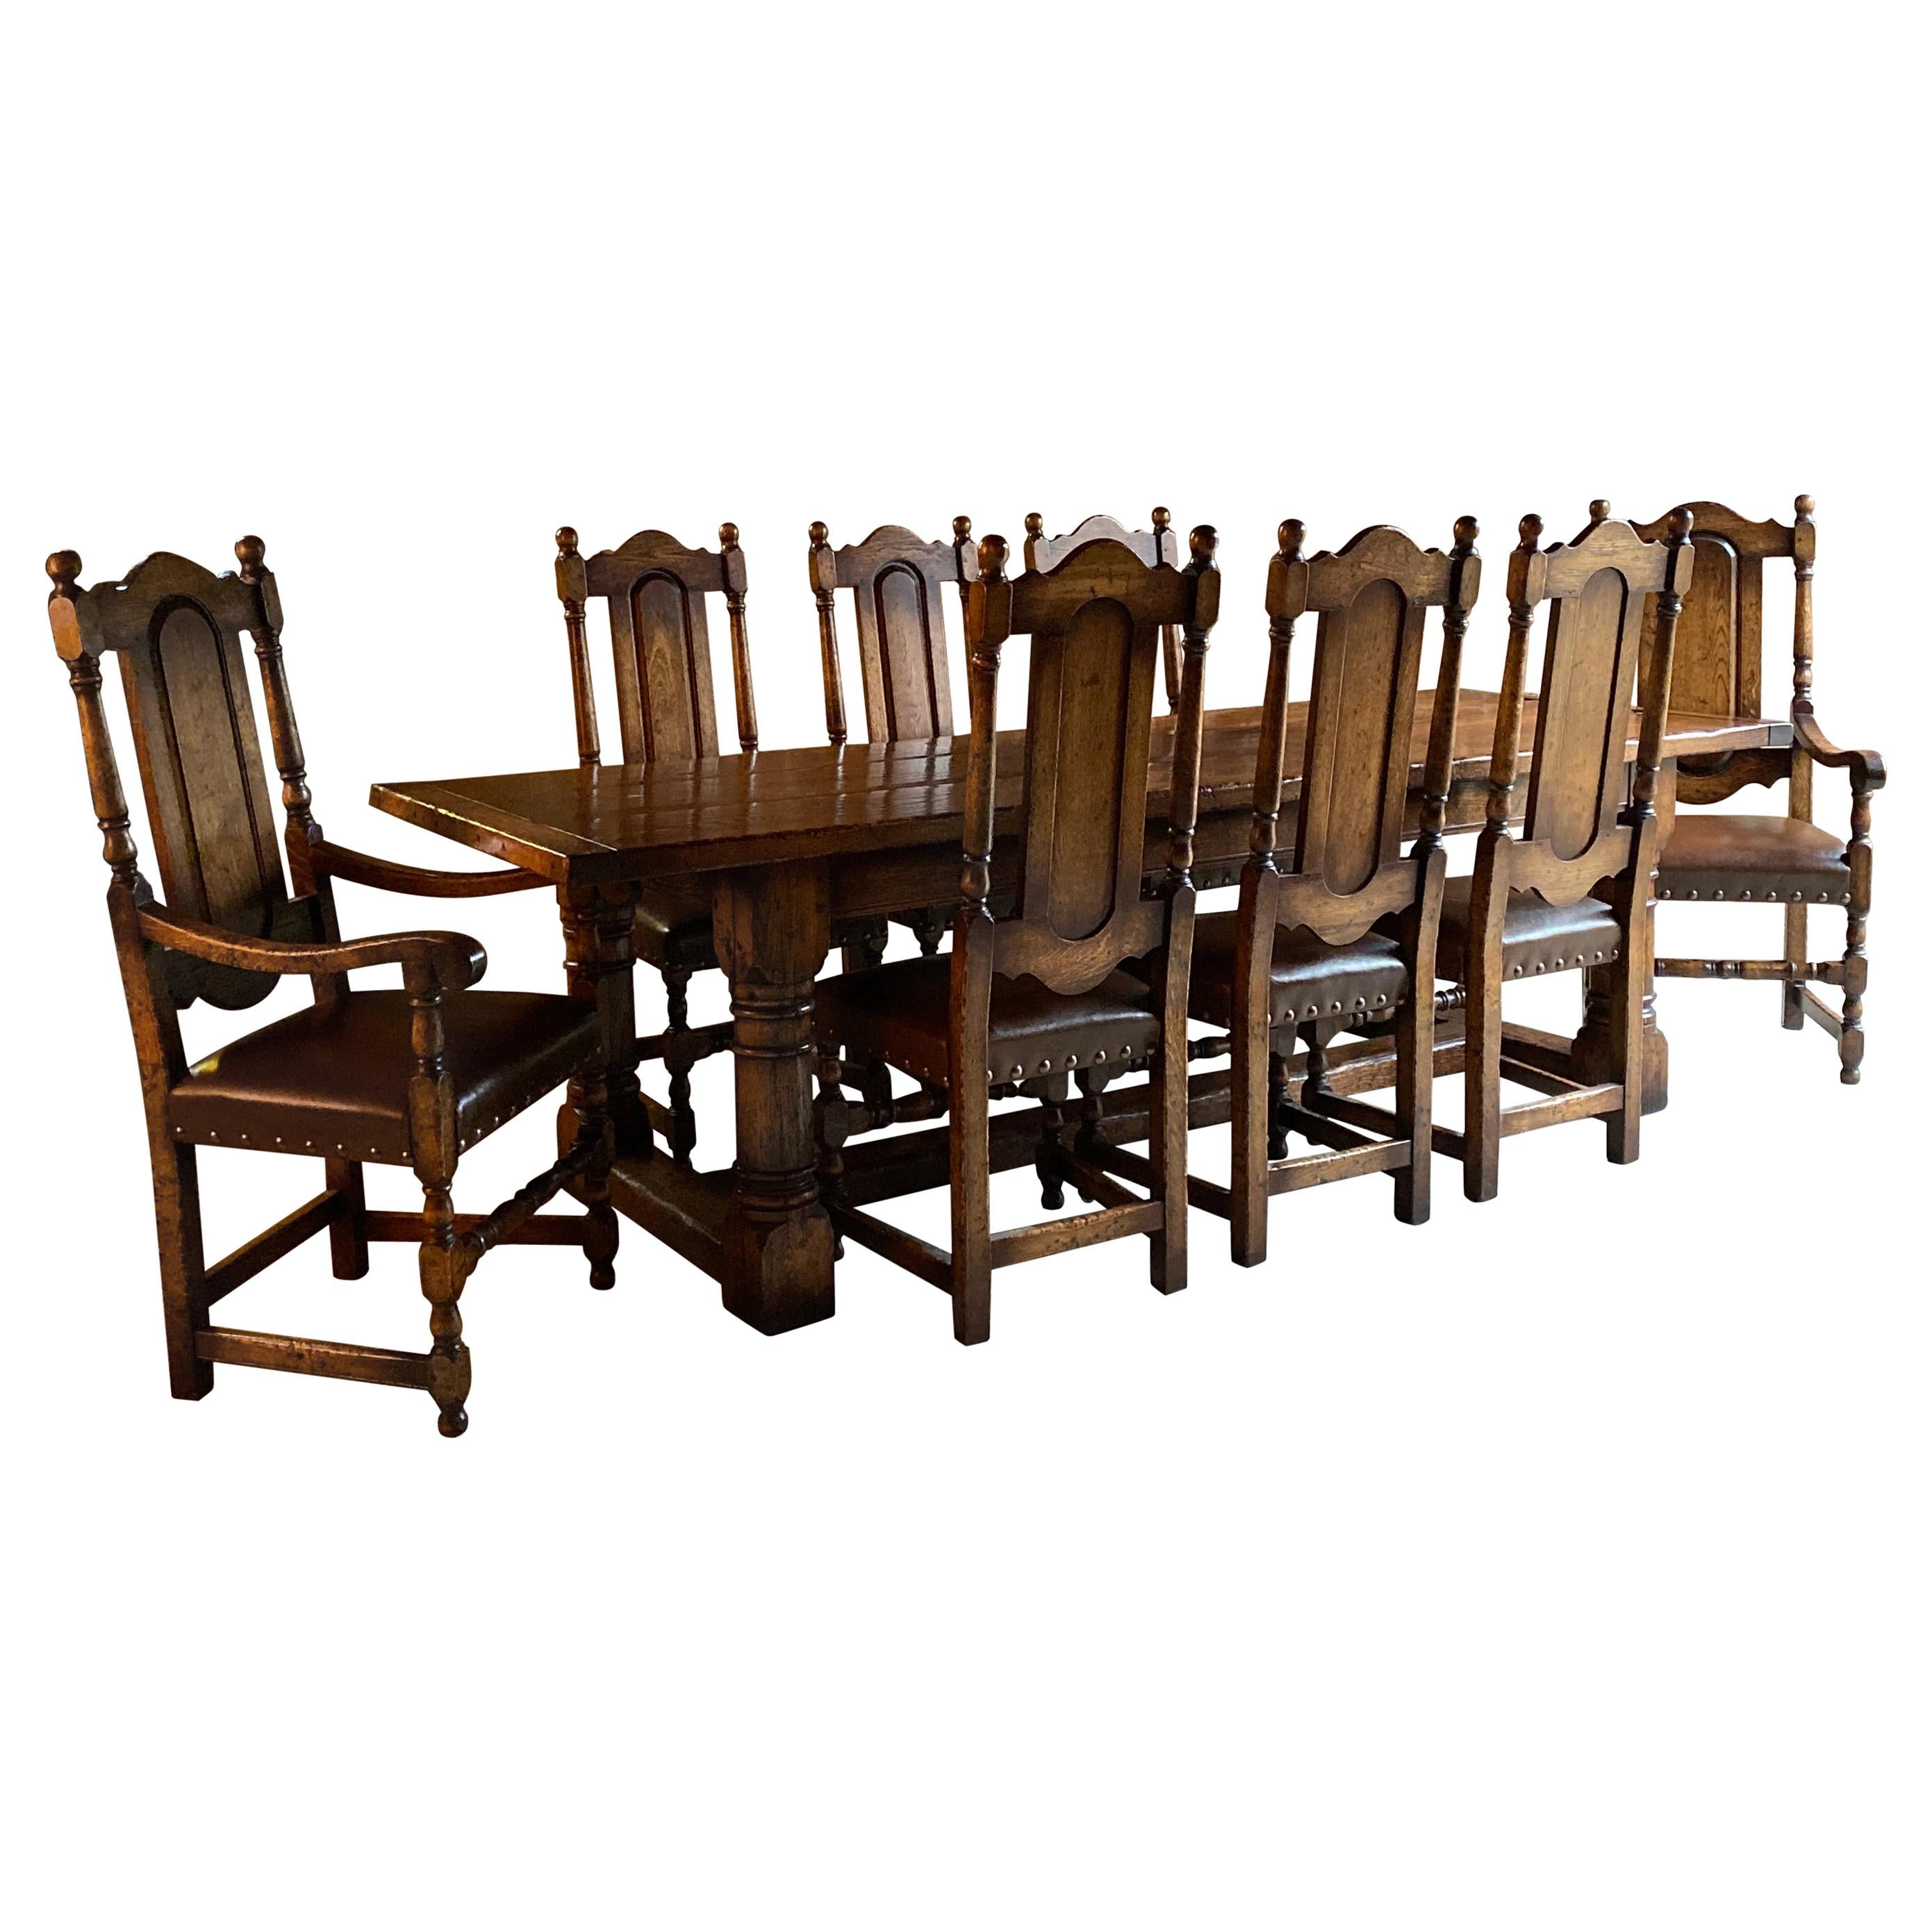 Antique Oak Refectory Dining Table and Eight Chairs 19th Century, circa 1890